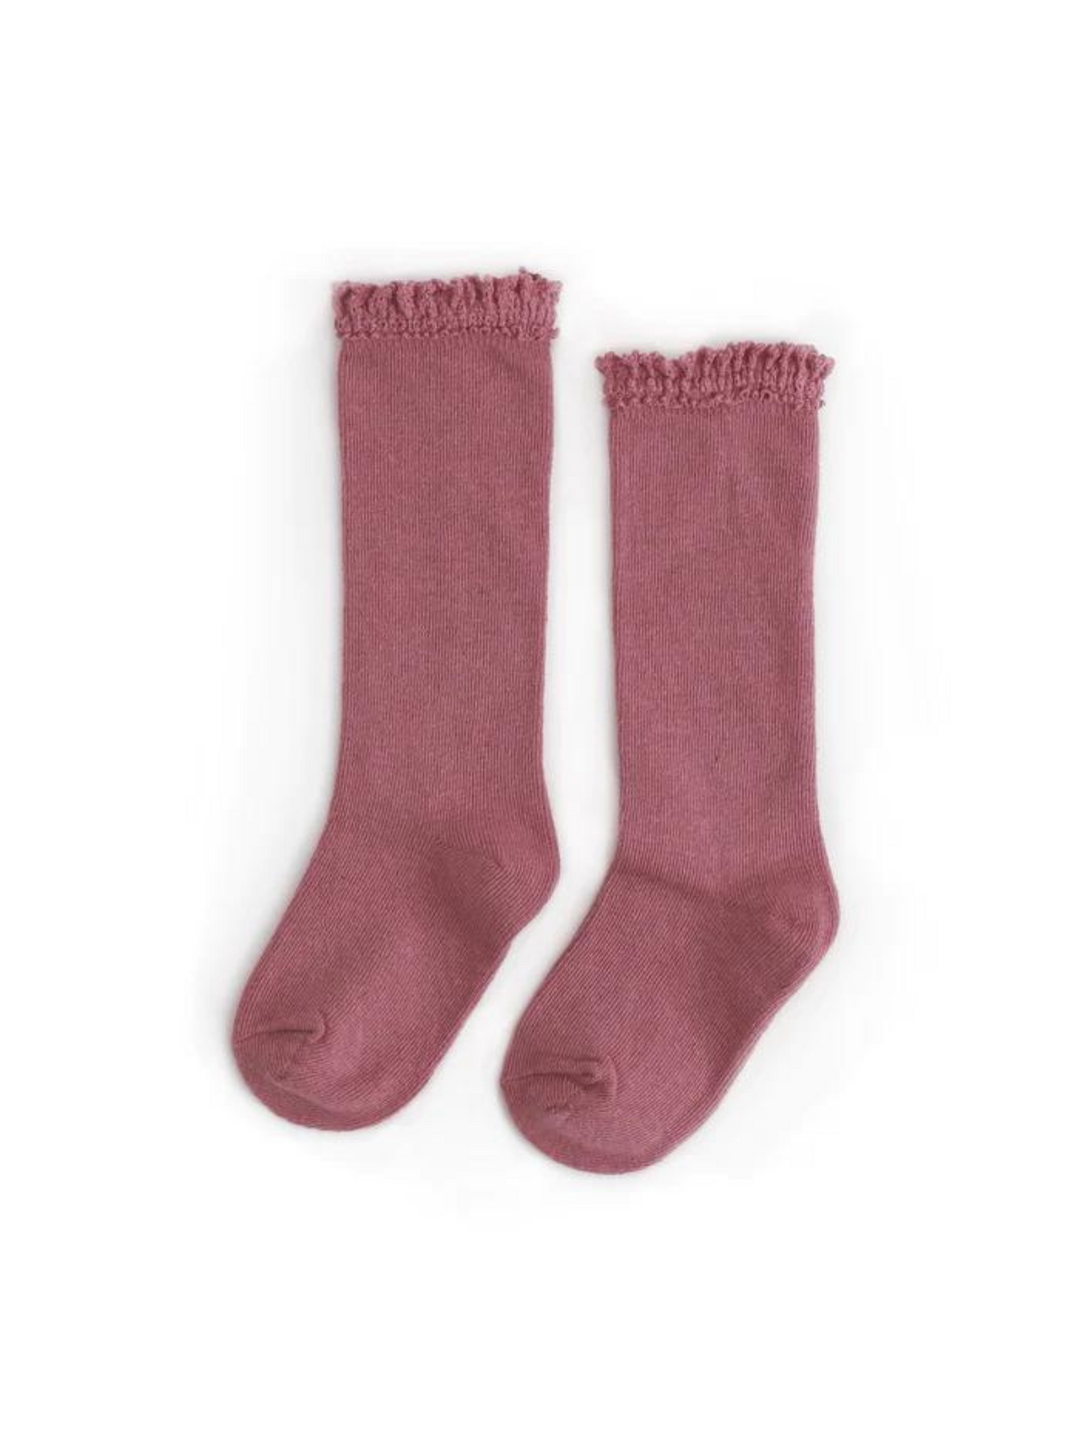 Lace Top Knee High Socks - Mauve Rose | Little Stocking Co.